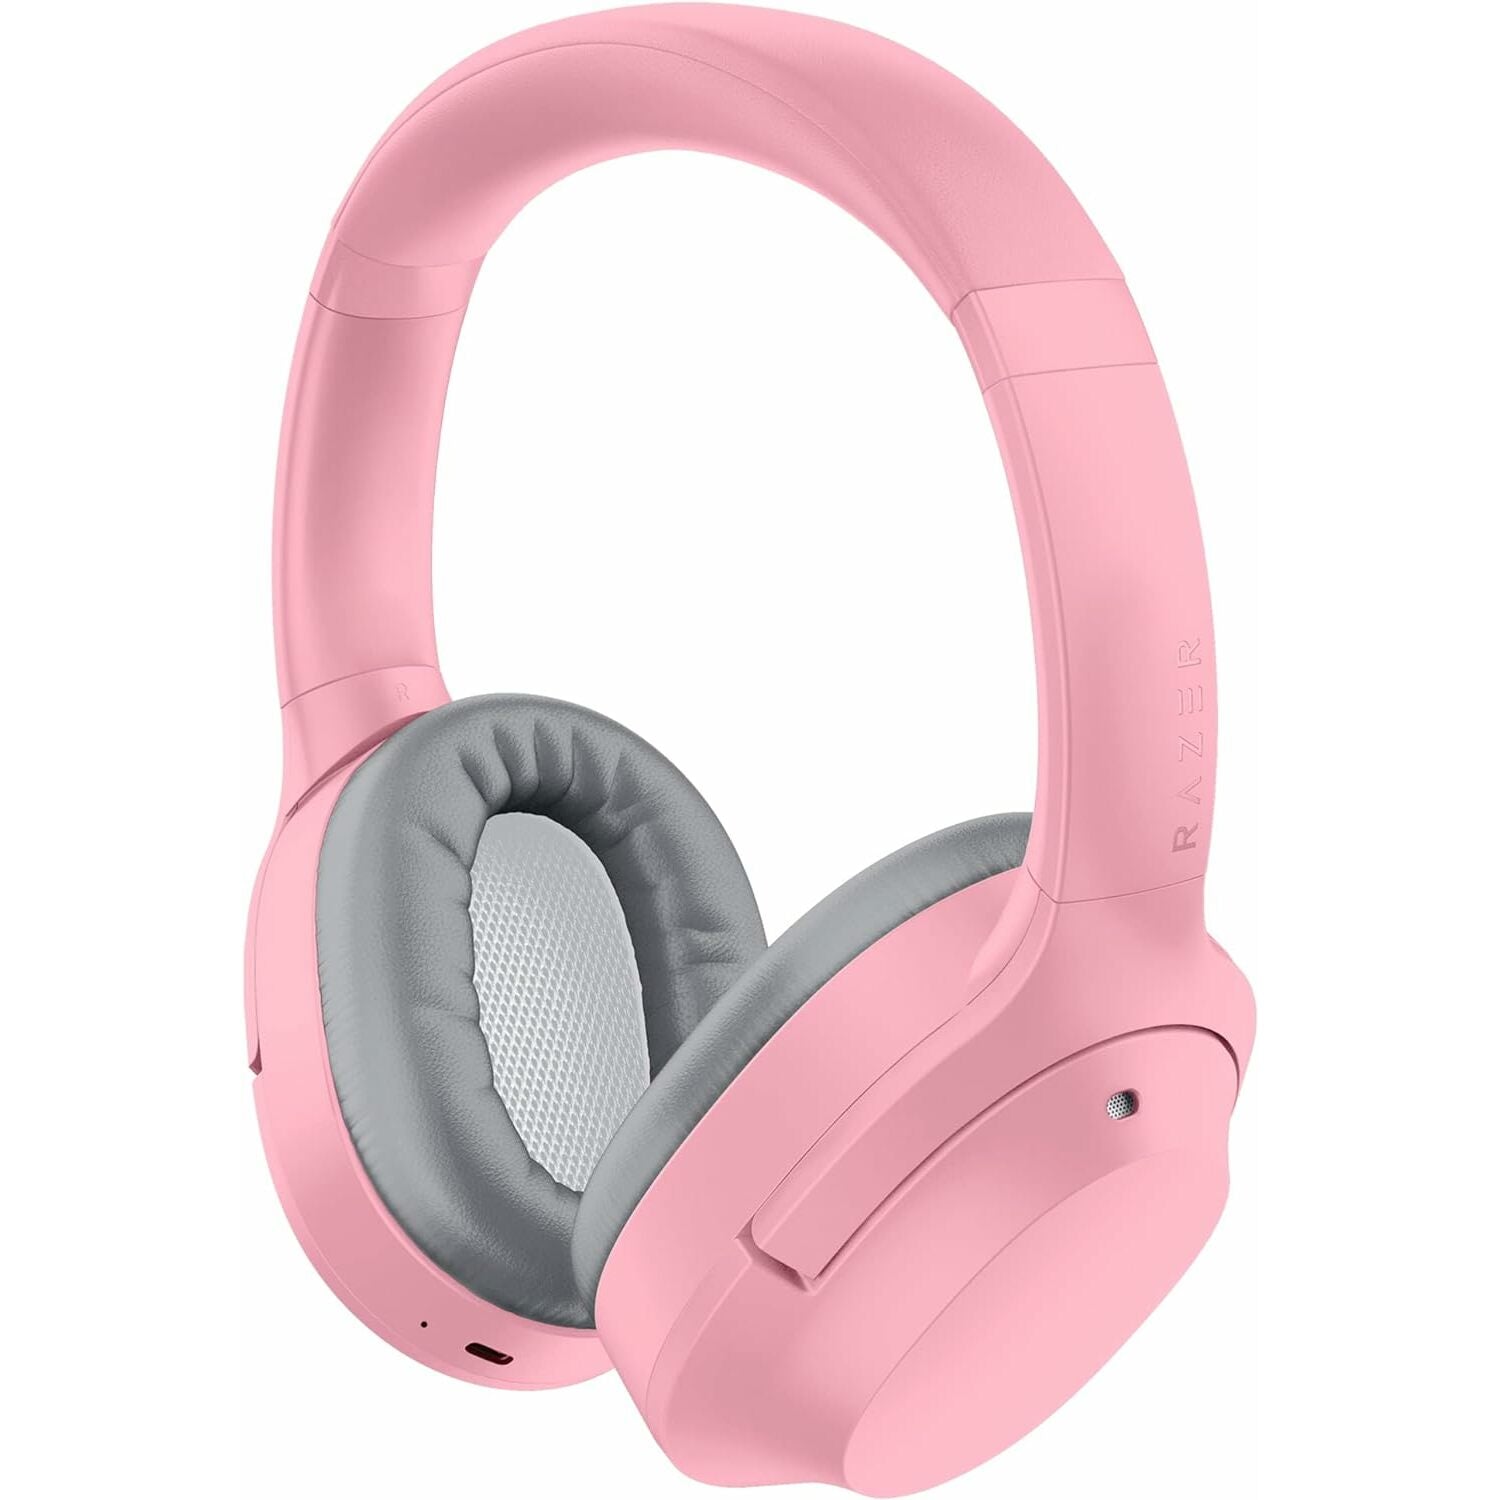 Razer Opus X Wireless Low Latency Headset Active Noise Cancellation, Bluetooth 5.0, Built-In Microphones - Quartz Pink